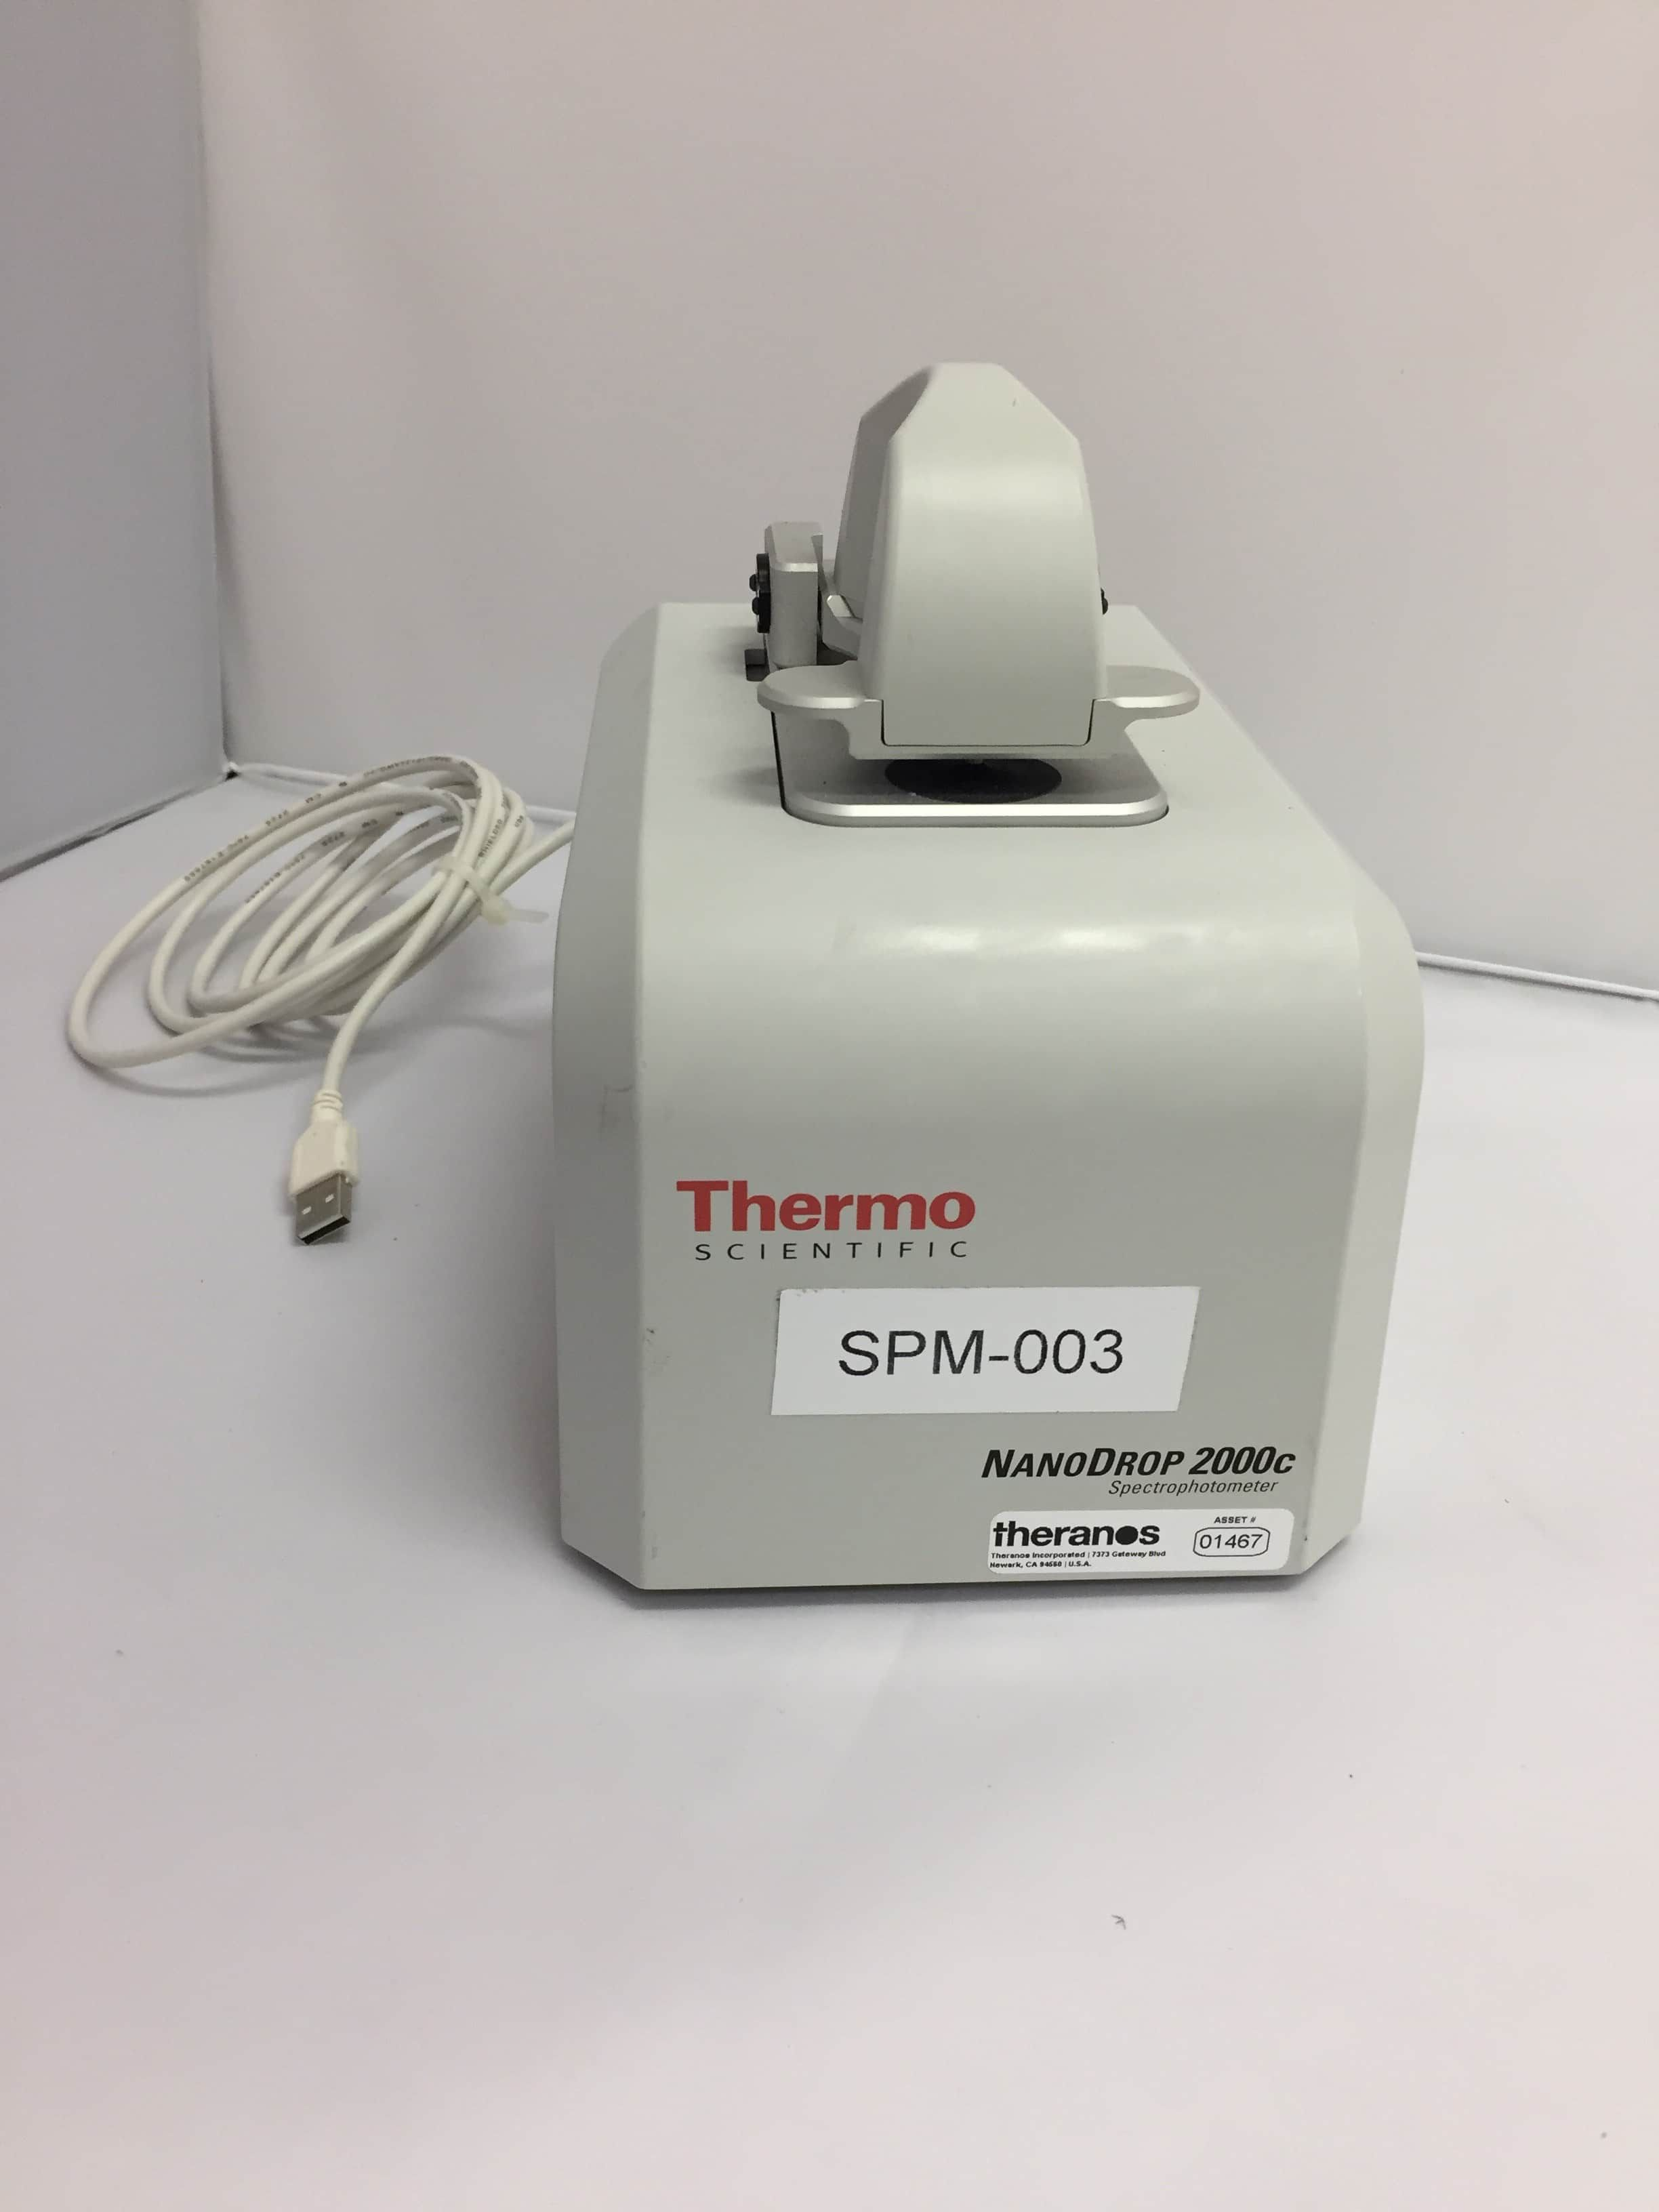 Thermo Scientific NanoDrop 2000C UV/VIS Spectrophotometer, AC Adapter and Laptop Included